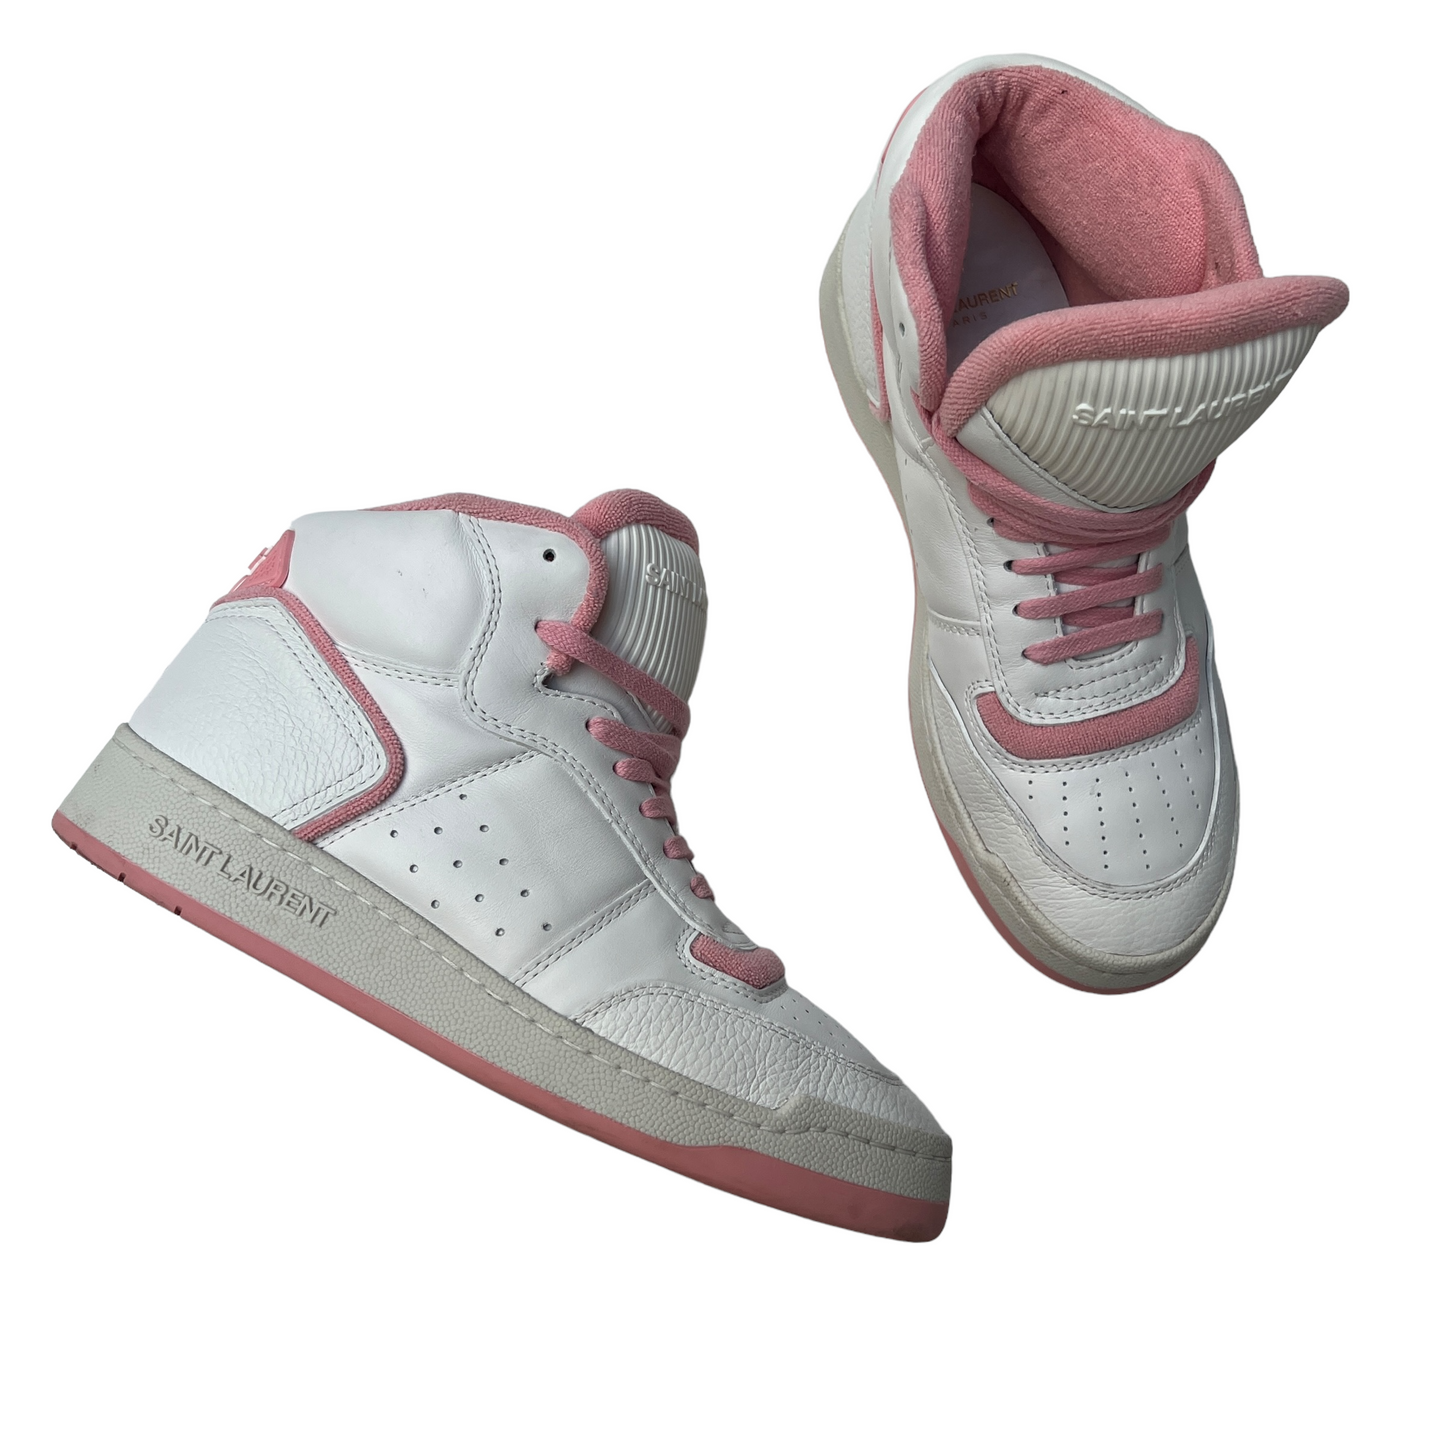 White and Pink High Top Sneakers - 8